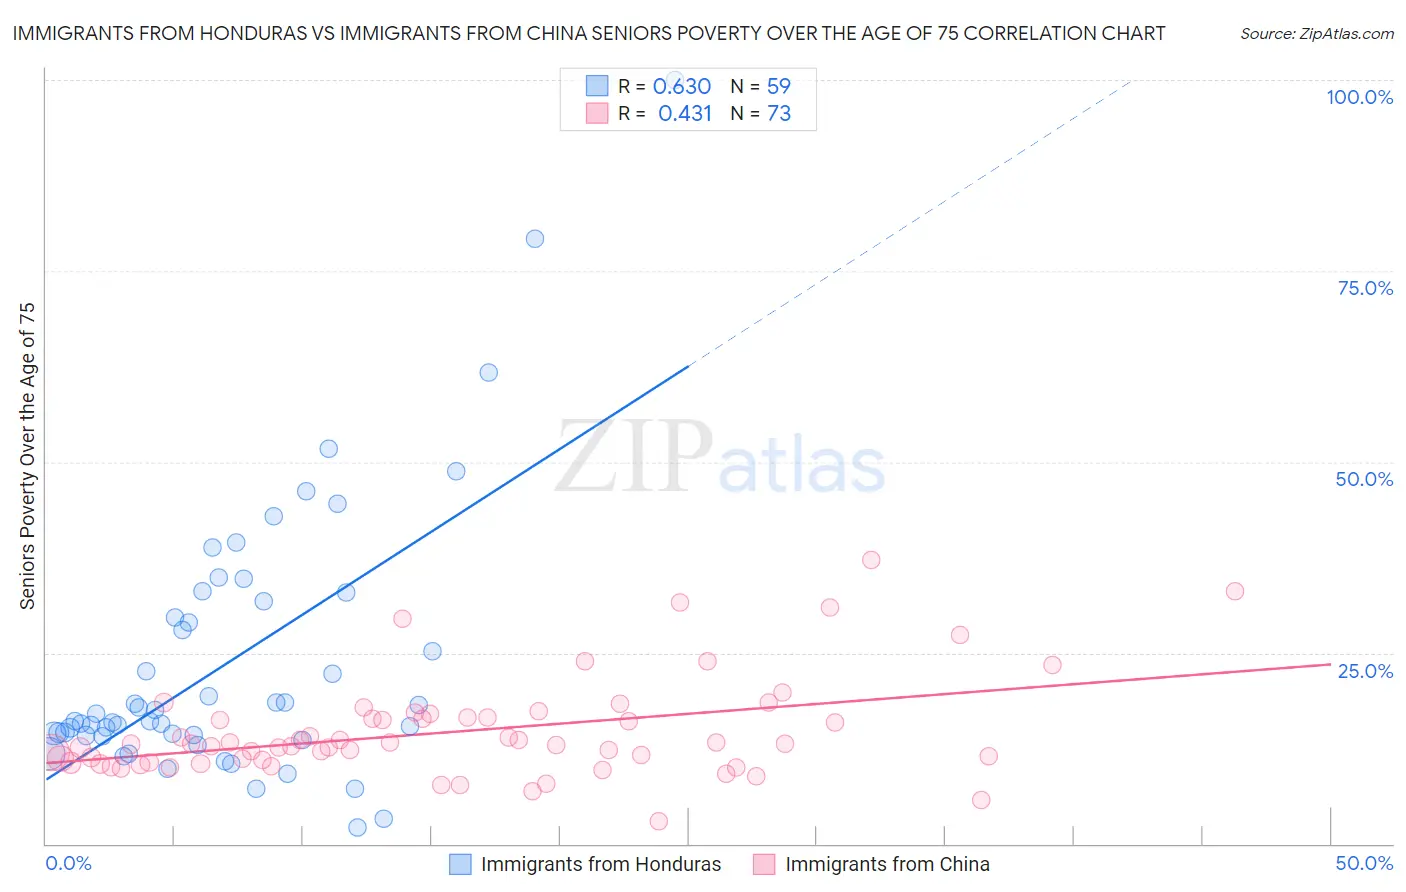 Immigrants from Honduras vs Immigrants from China Seniors Poverty Over the Age of 75